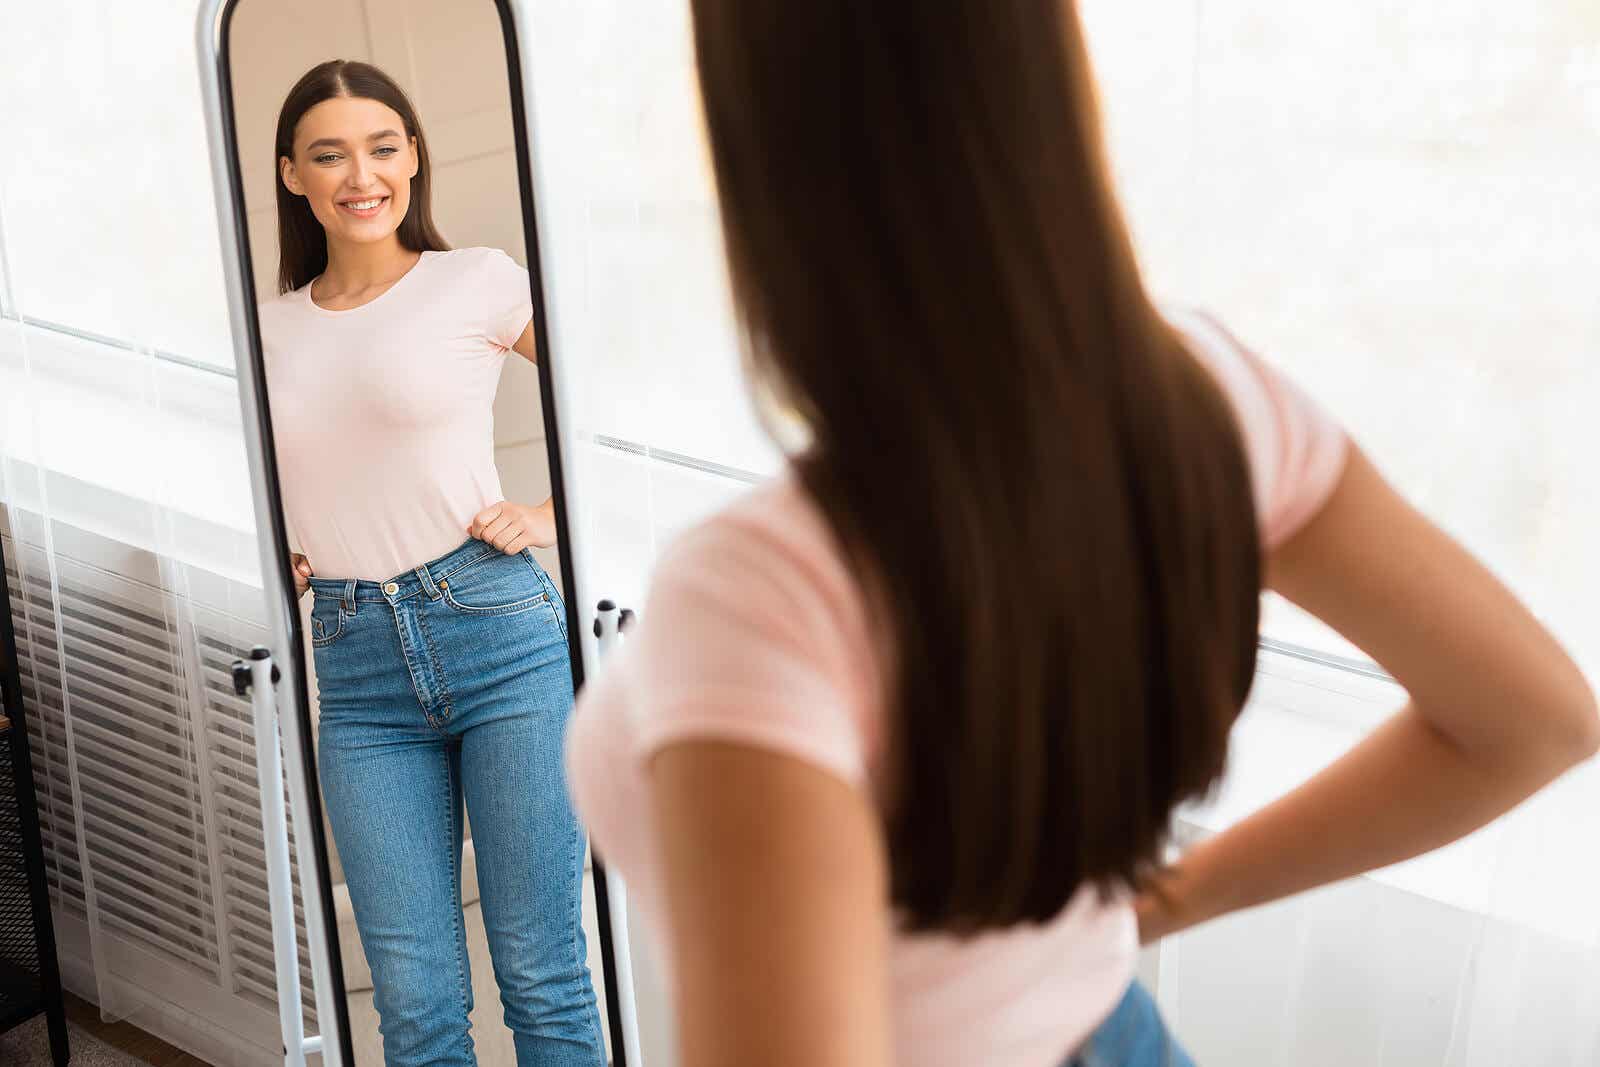 A girl smiling as she looks at herself in the mirror.